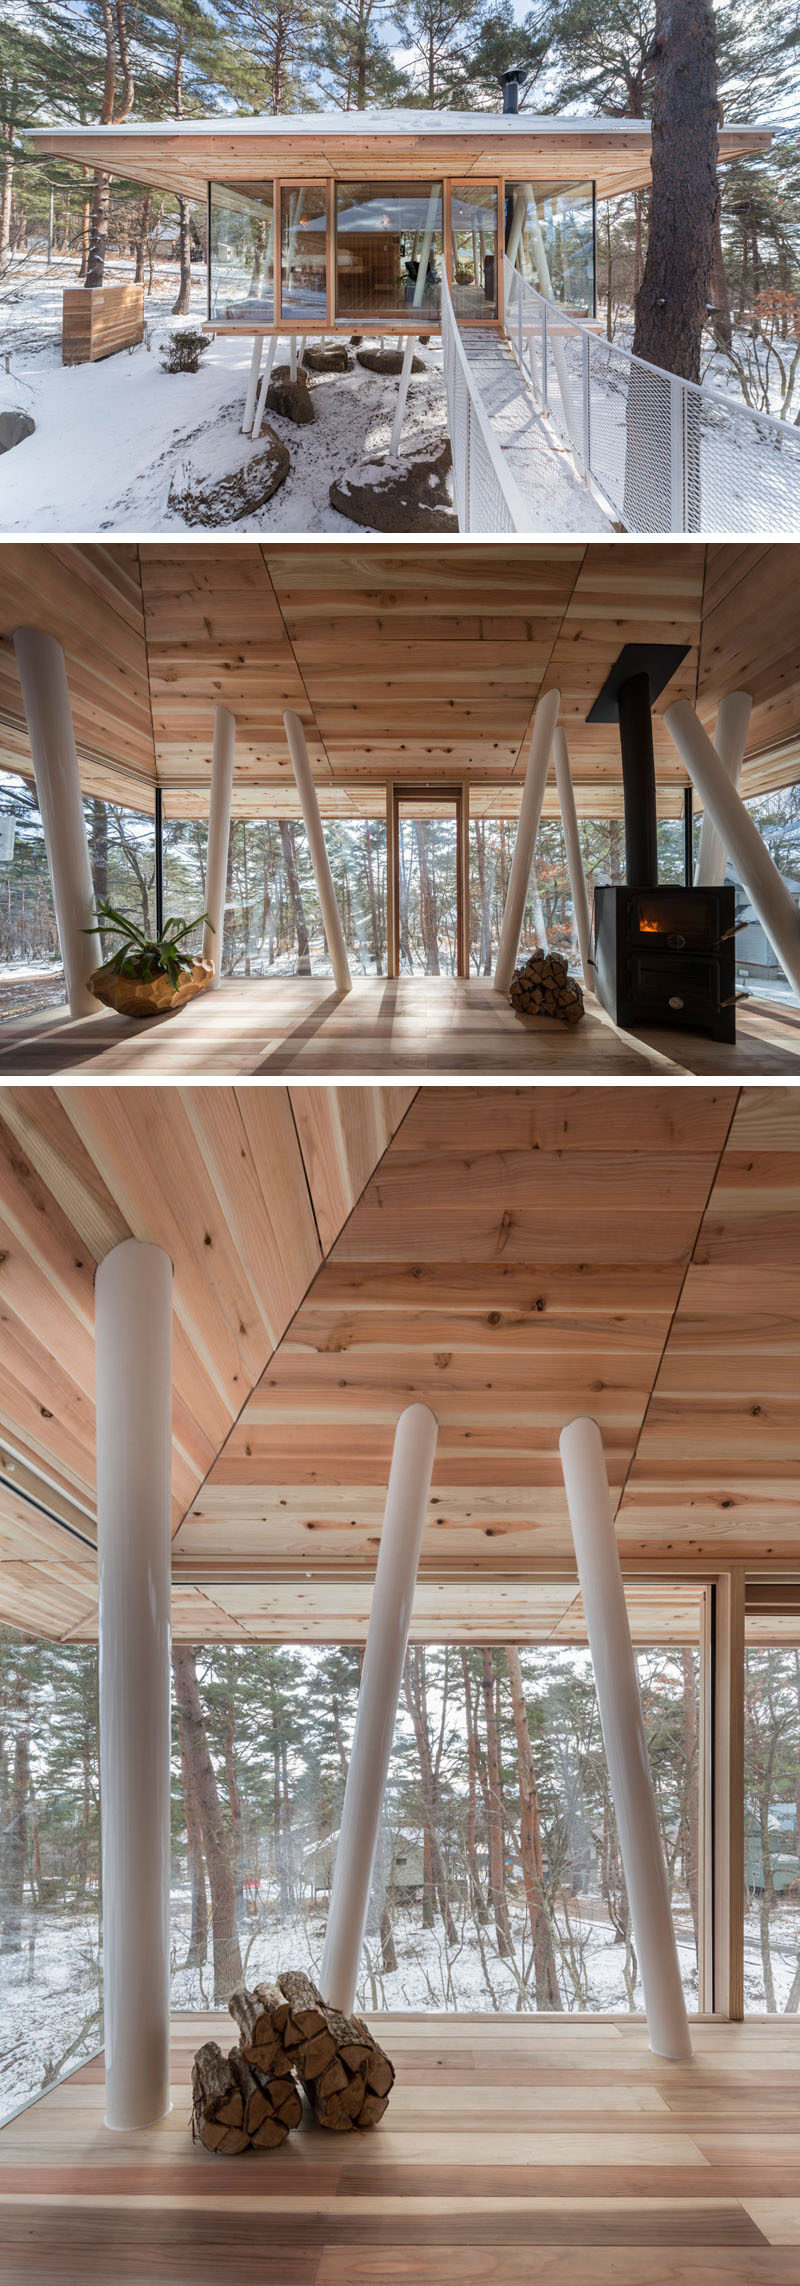 Architecture firm Life Style Koubou, have designed the 'One Year Project', a vacation home in Japan that features two separate buildings positioned on stilts and connected by a bridge. #Architecture #ModernArchitecture #Stilts #VacationHome #JapaneseArchitecture #InteriorDesign #Wood